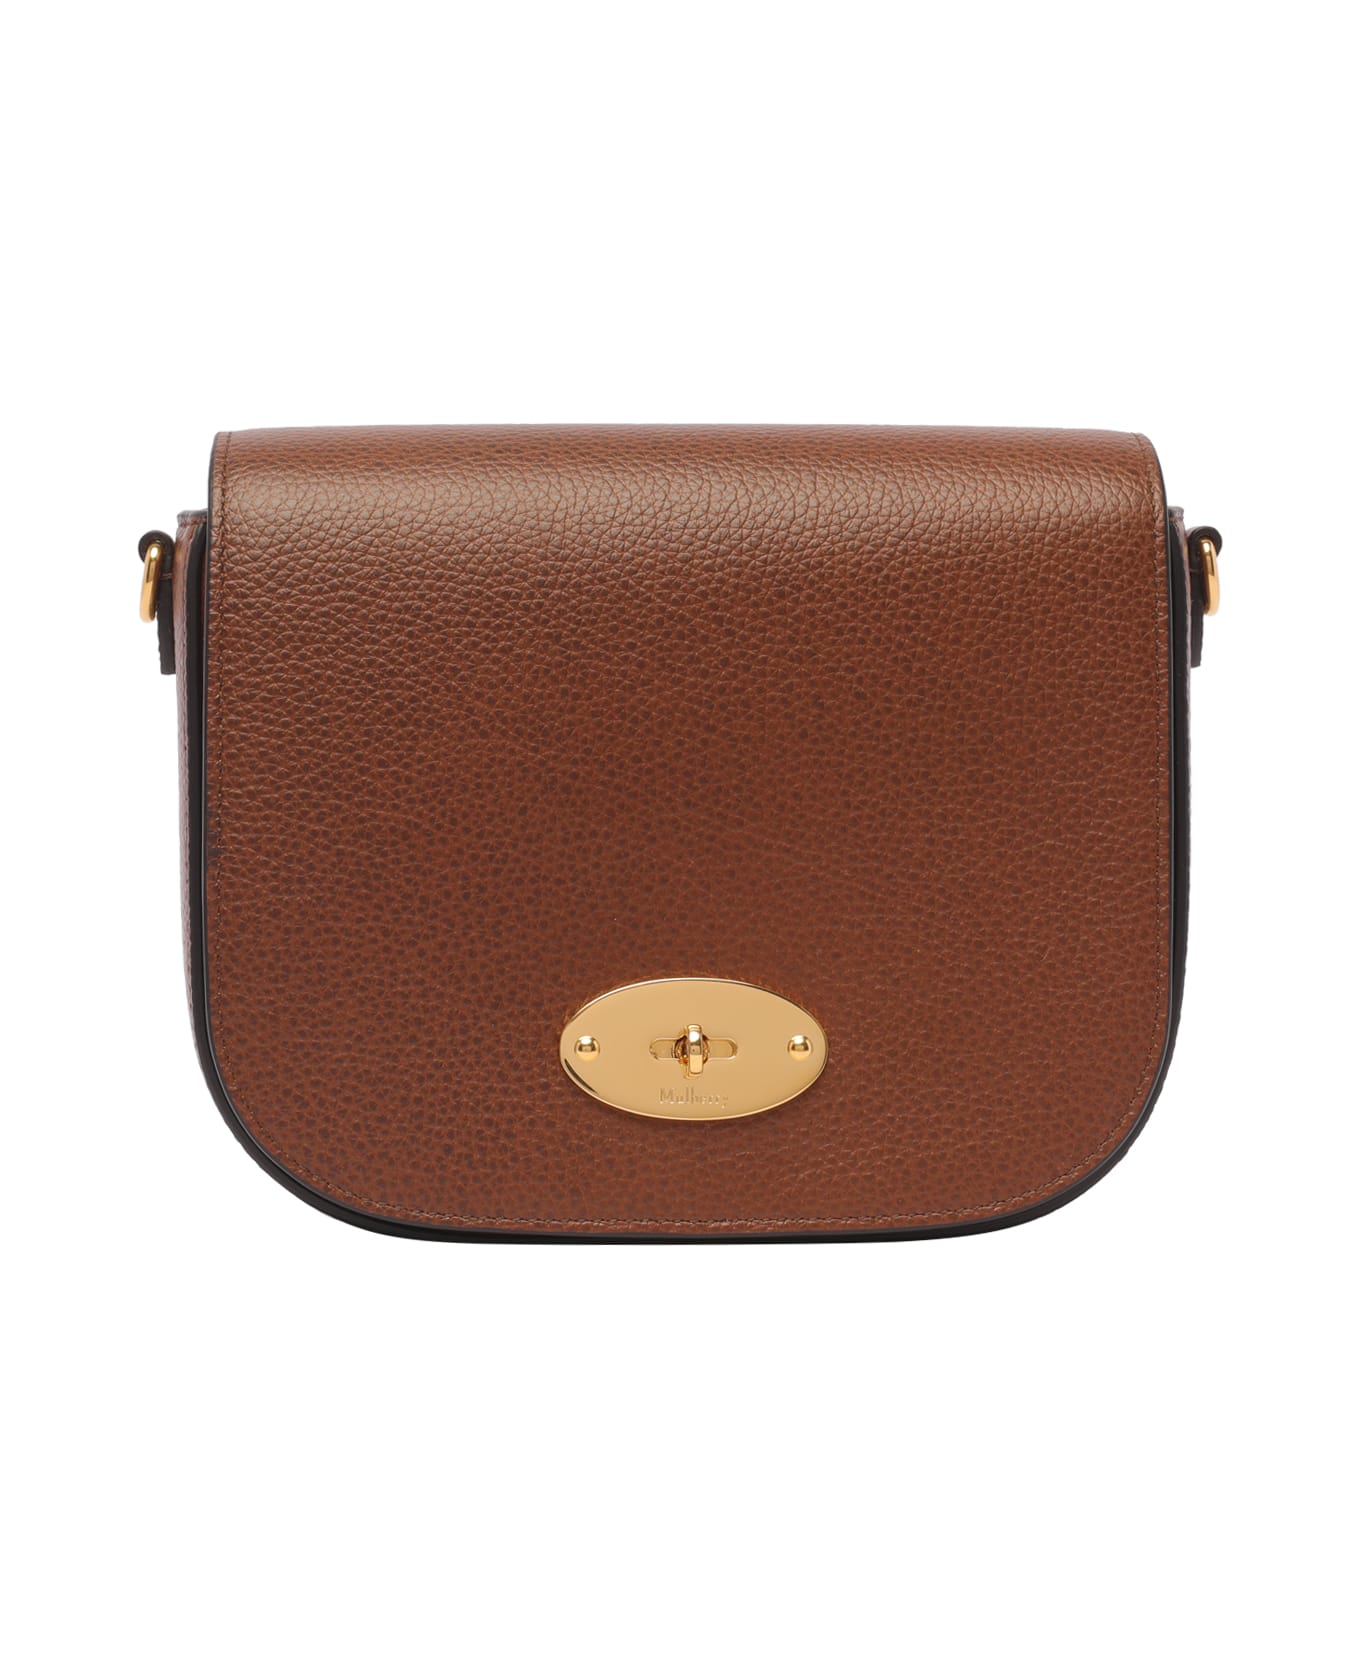 Mulberry Small Darley Satchel Two Tone - Brown トートバッグ